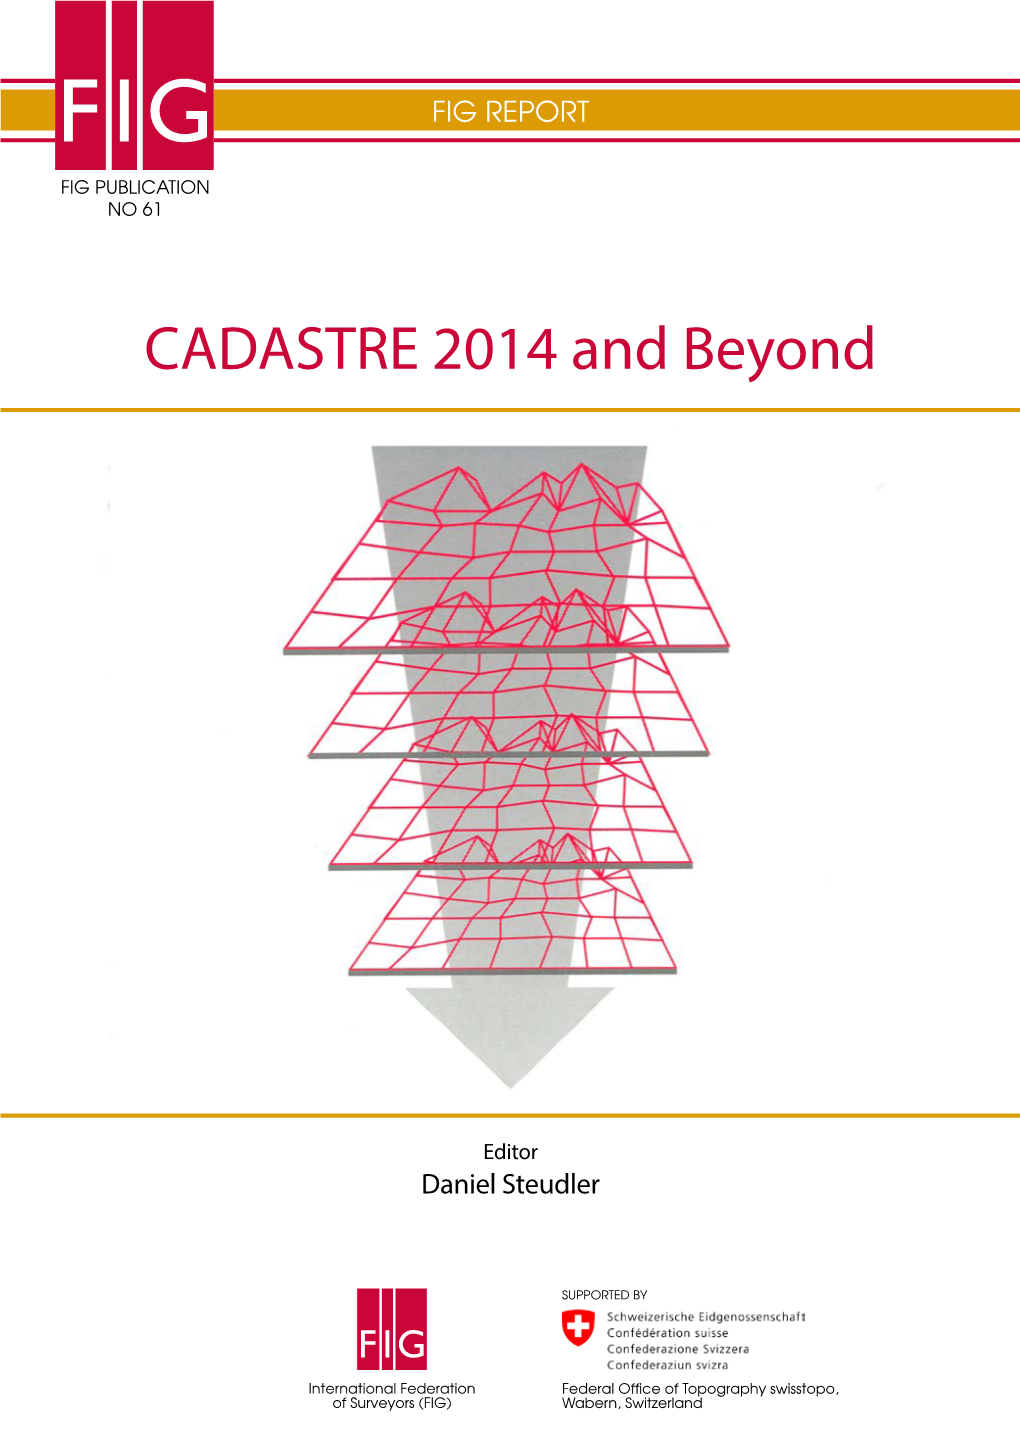 CADASTRE 2014 and Beyond